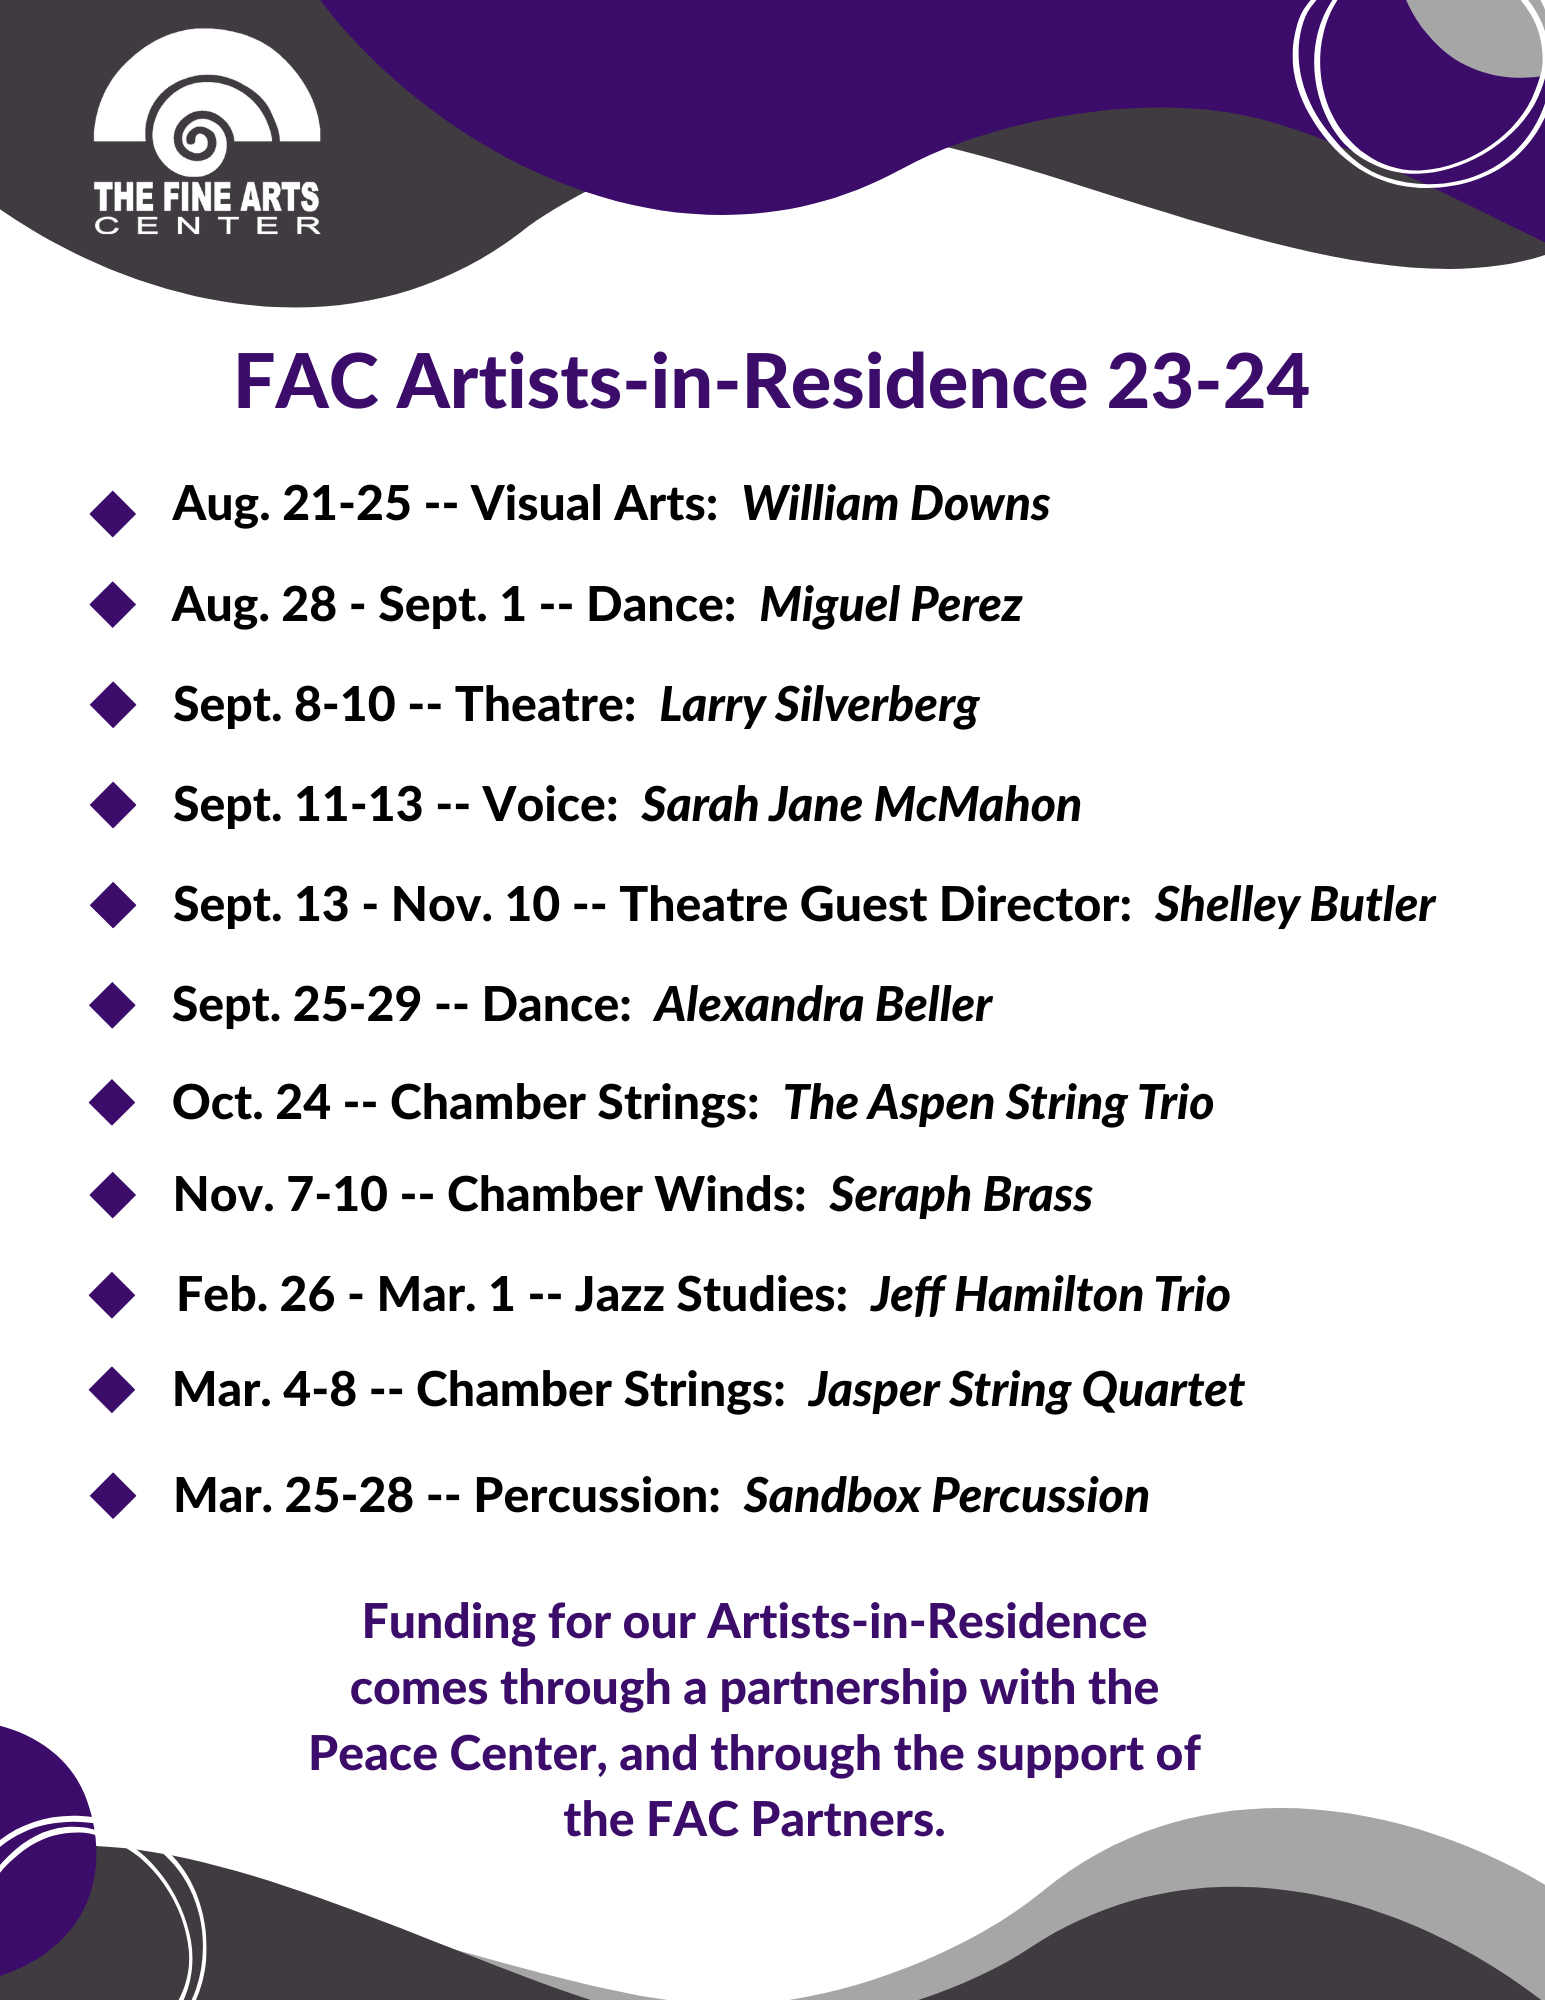 Artists-in-Residence 23-24